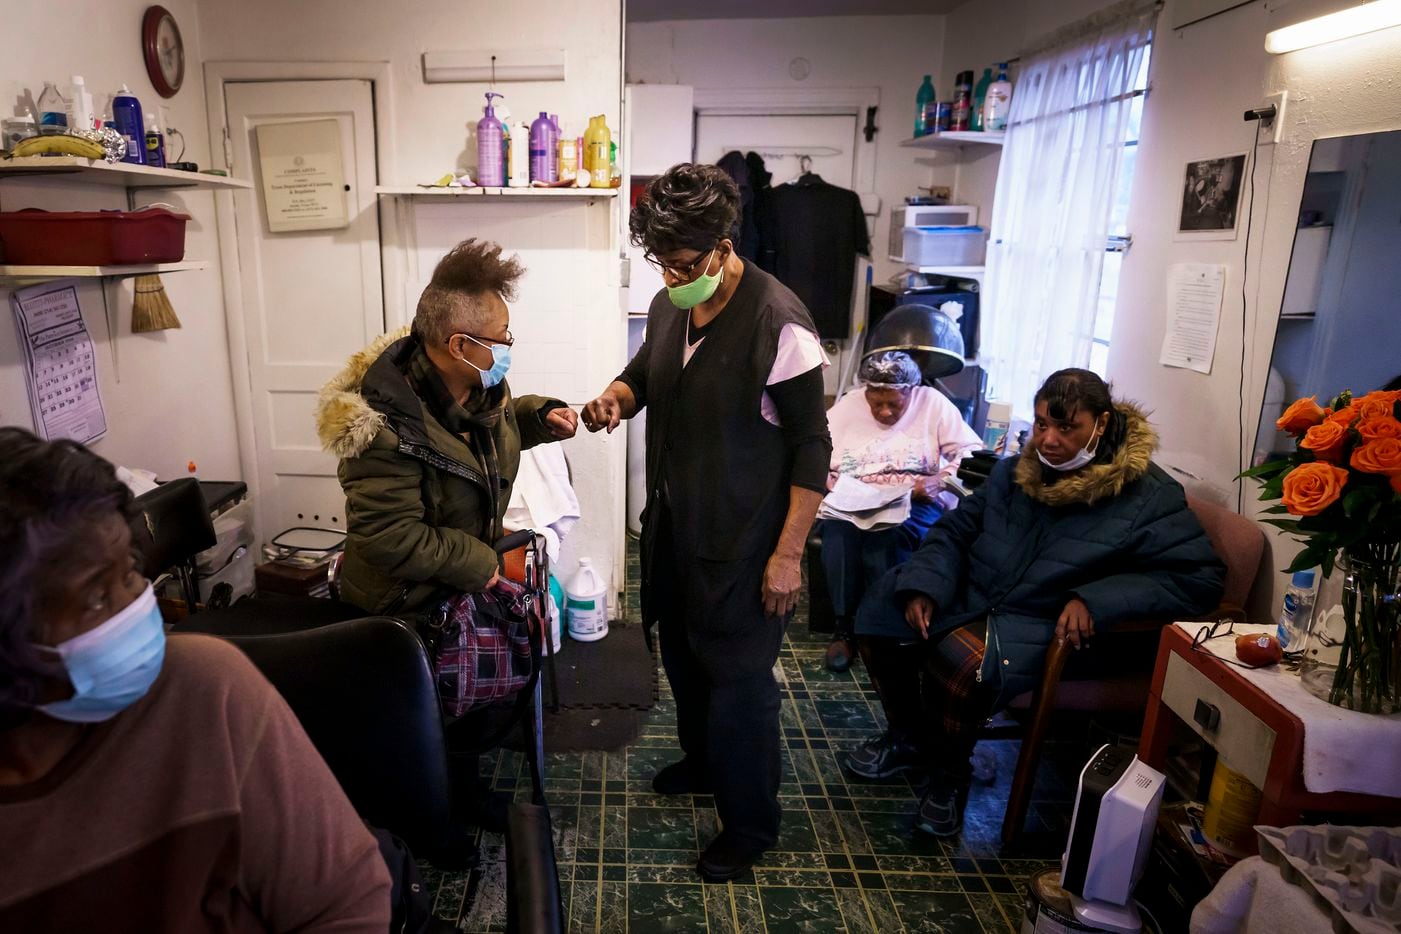 Earnestine Tarrant fist bumps with Sharon Curtis ay her hair salon in South Dallas on her final day.  “I can’t hug you, so we have to fist bump,” Tarrant said with a laugh, referring to the ongoing coronavirus pandemic.